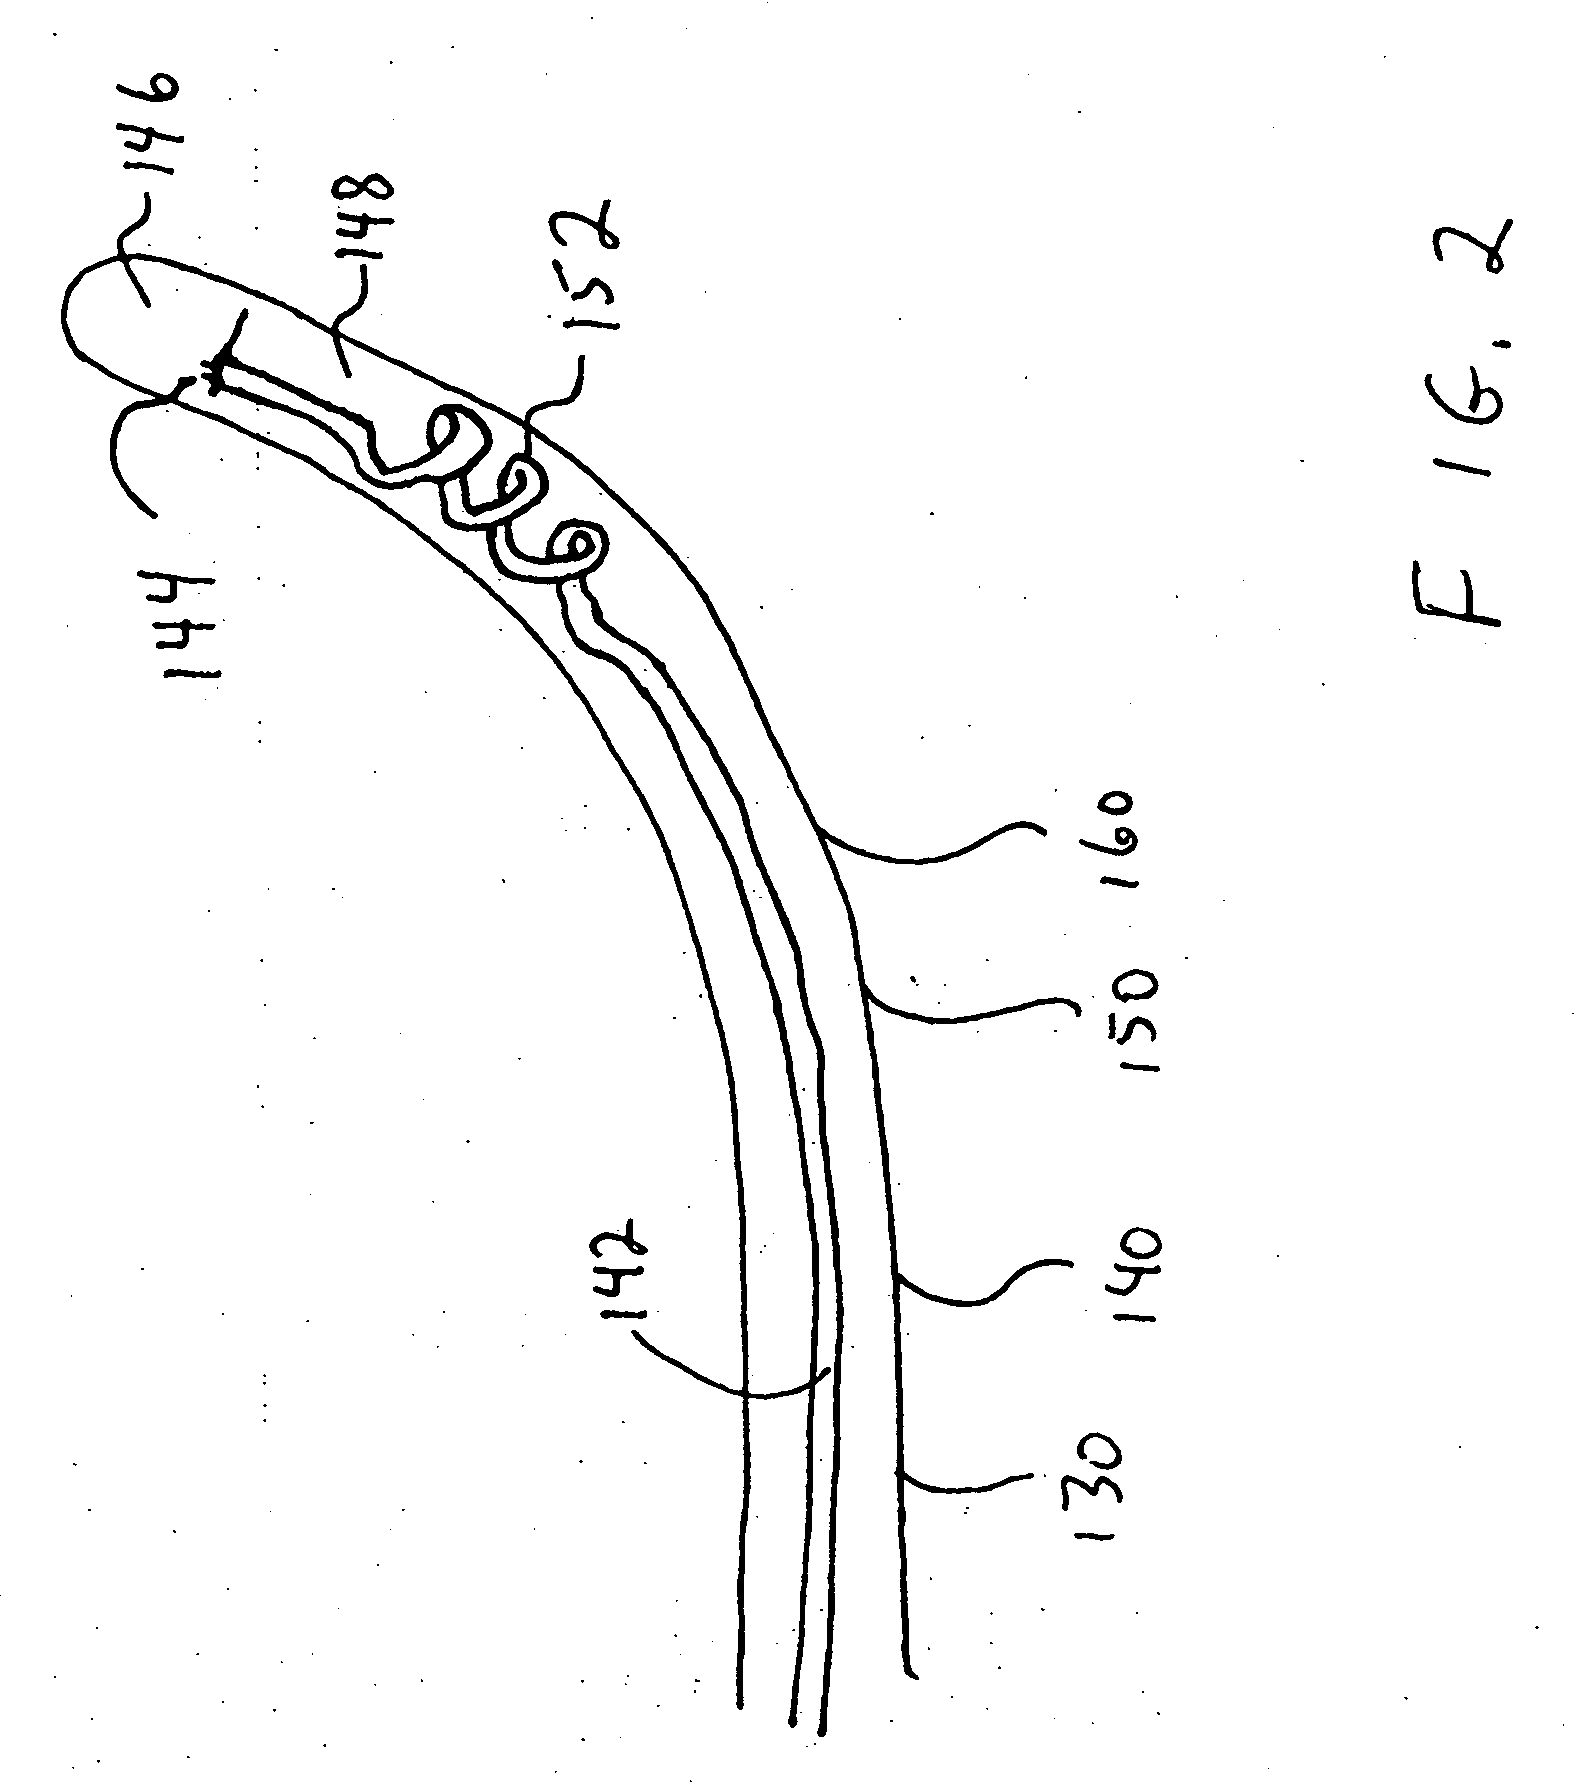 Endometrial ablation device and method